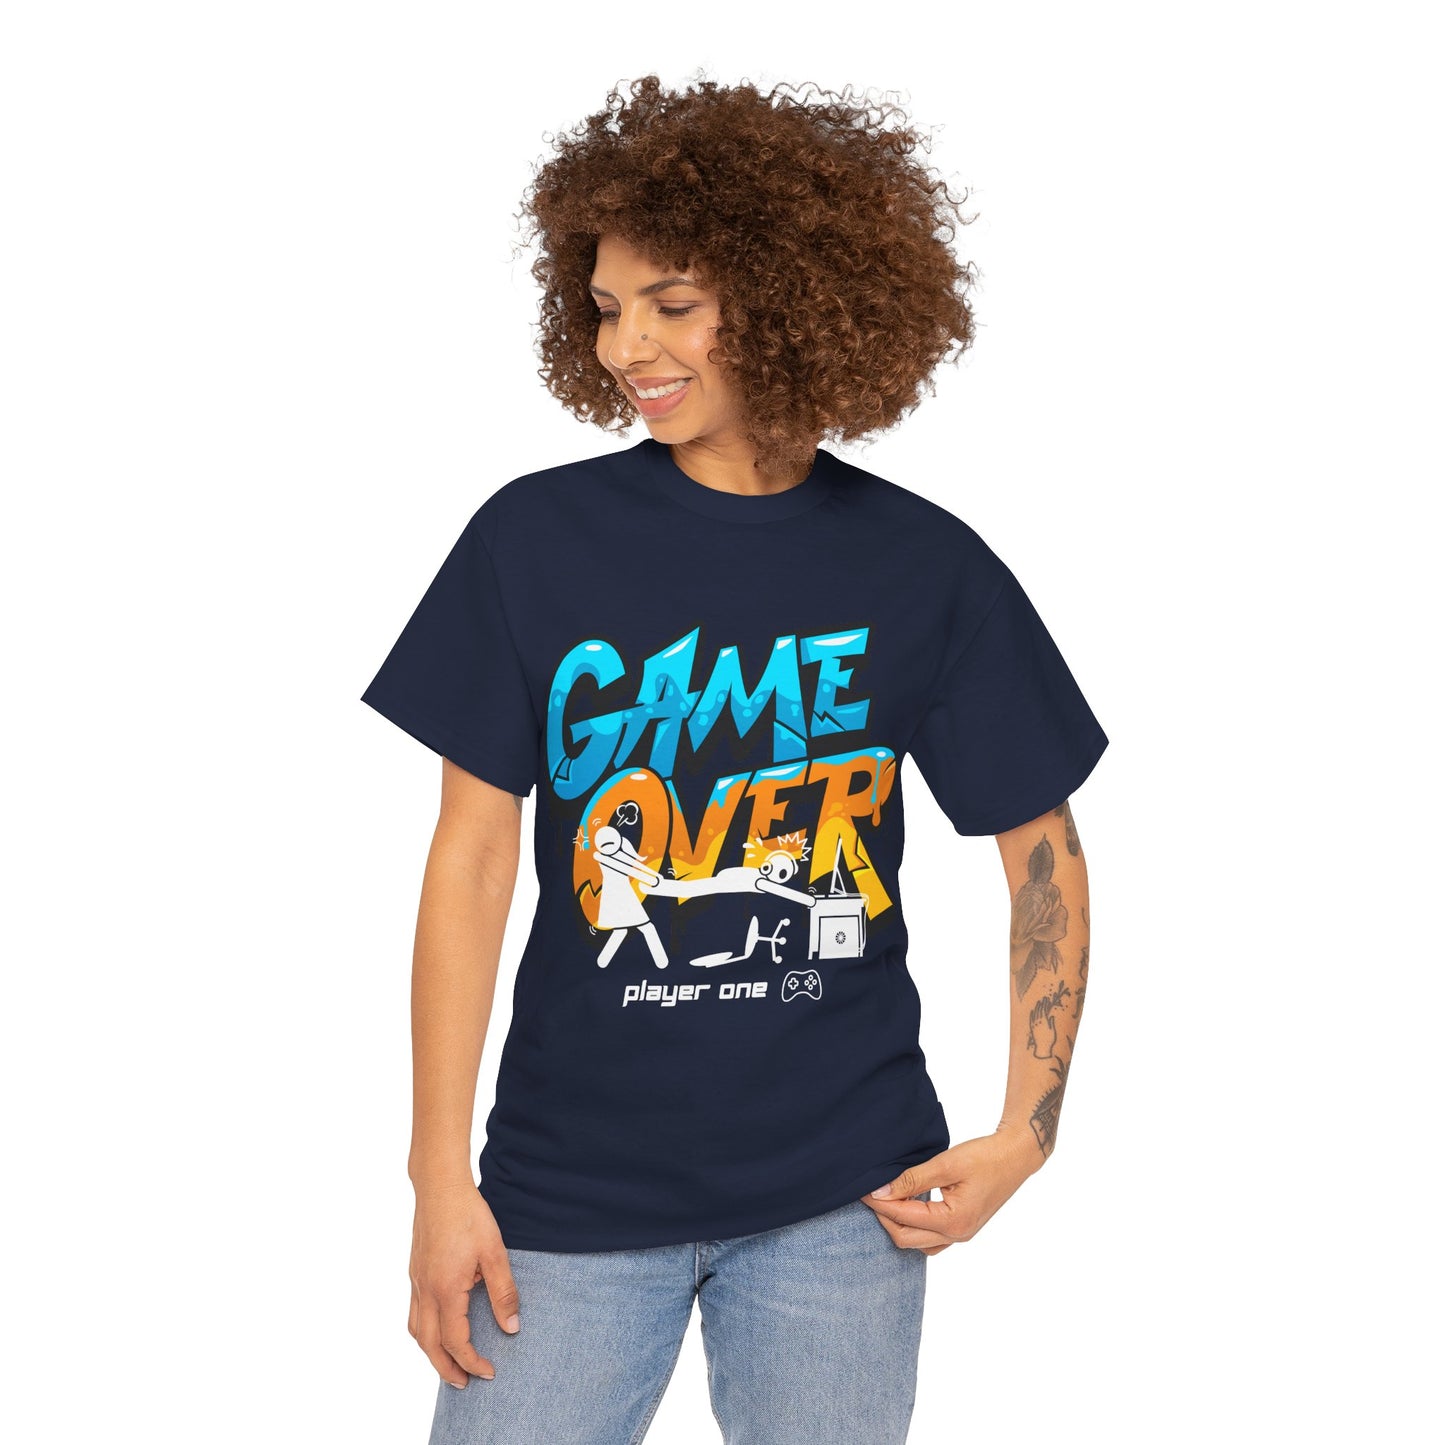 Game Over T-Shirt, Gamer Tee 100% Cotton, 5 Colours, AUS-USA-CAN warehouse, Free post.